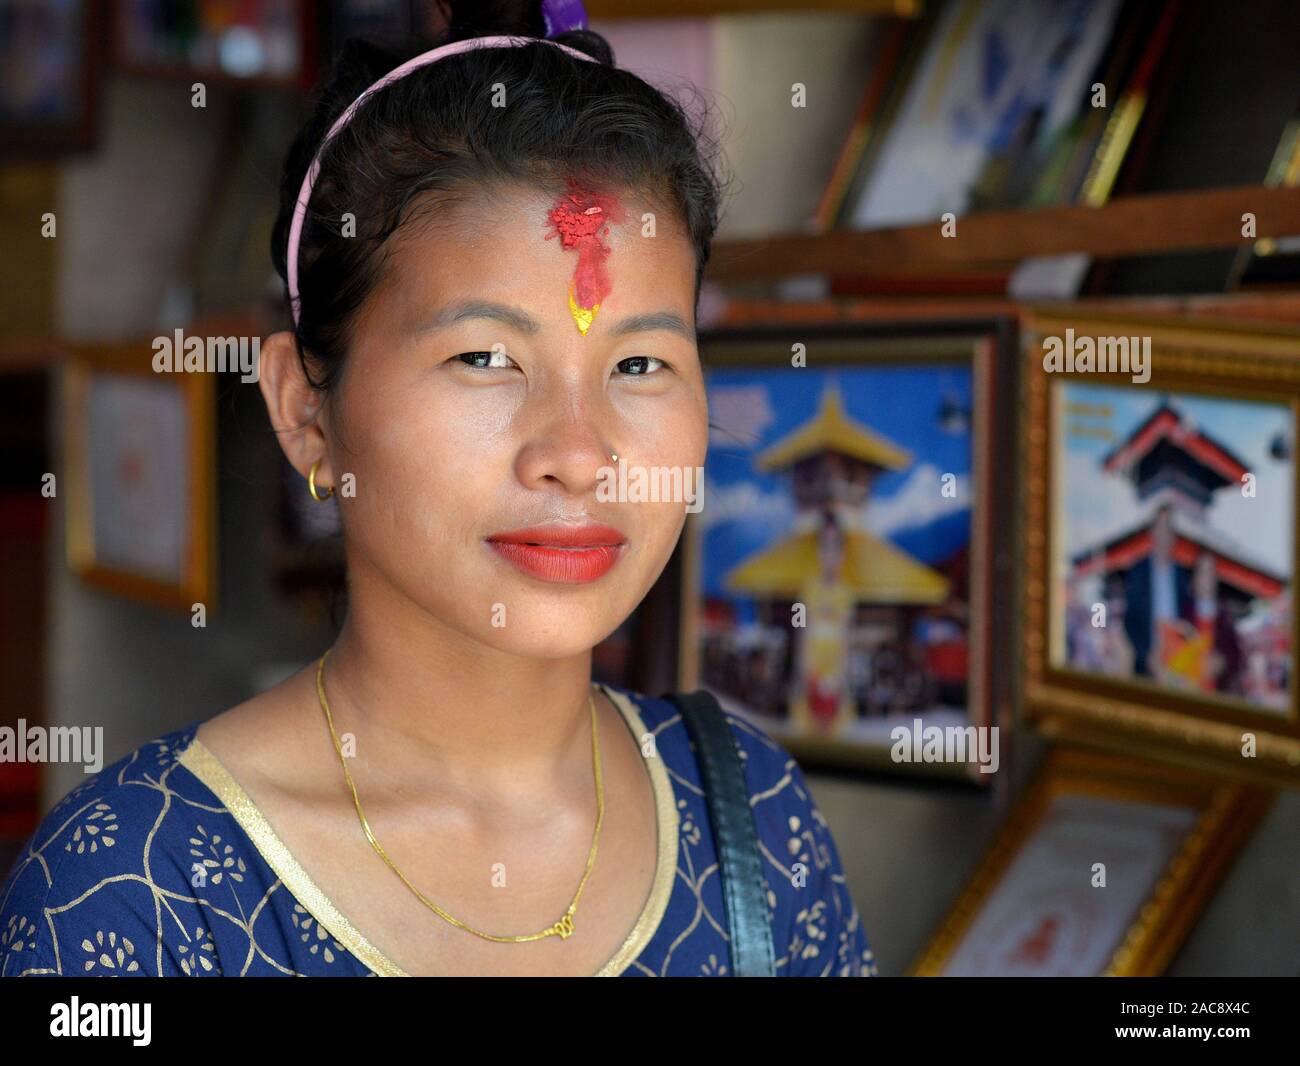 Young Nepali Hindu woman with red rice tilak mark on her forehead poses for the camera in front of souvenir photographs of Manakamana Temple. Stock Photo